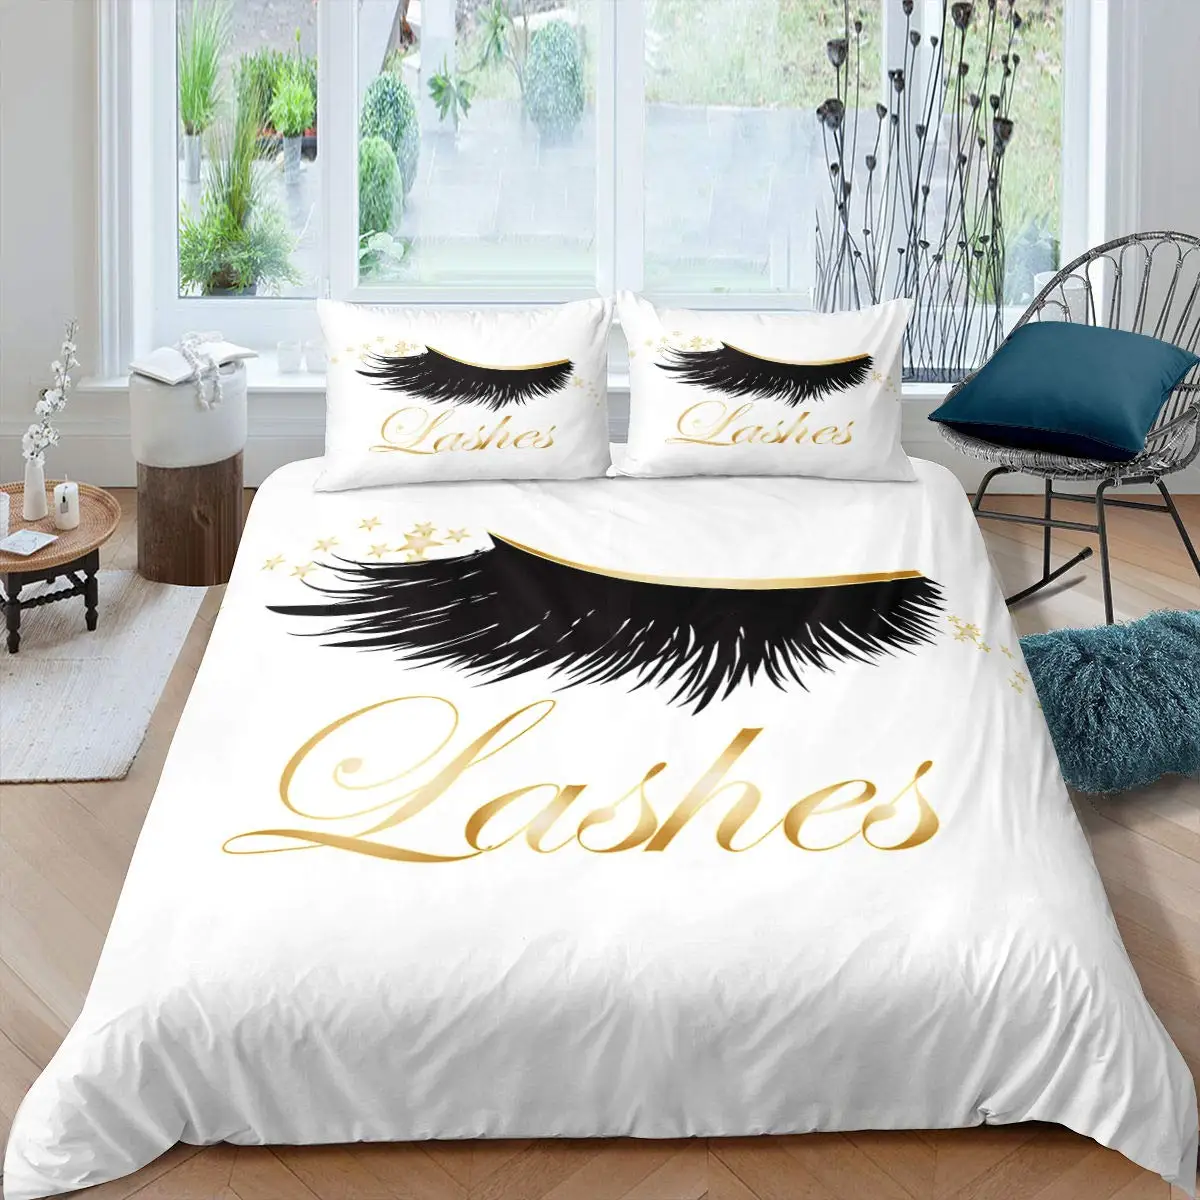 

Eyelash Duvet Cover King Queen Cartoon Woman Closed Eyes Long Lashes Bedding Set English Words Polyester Quilt Cover Romantic